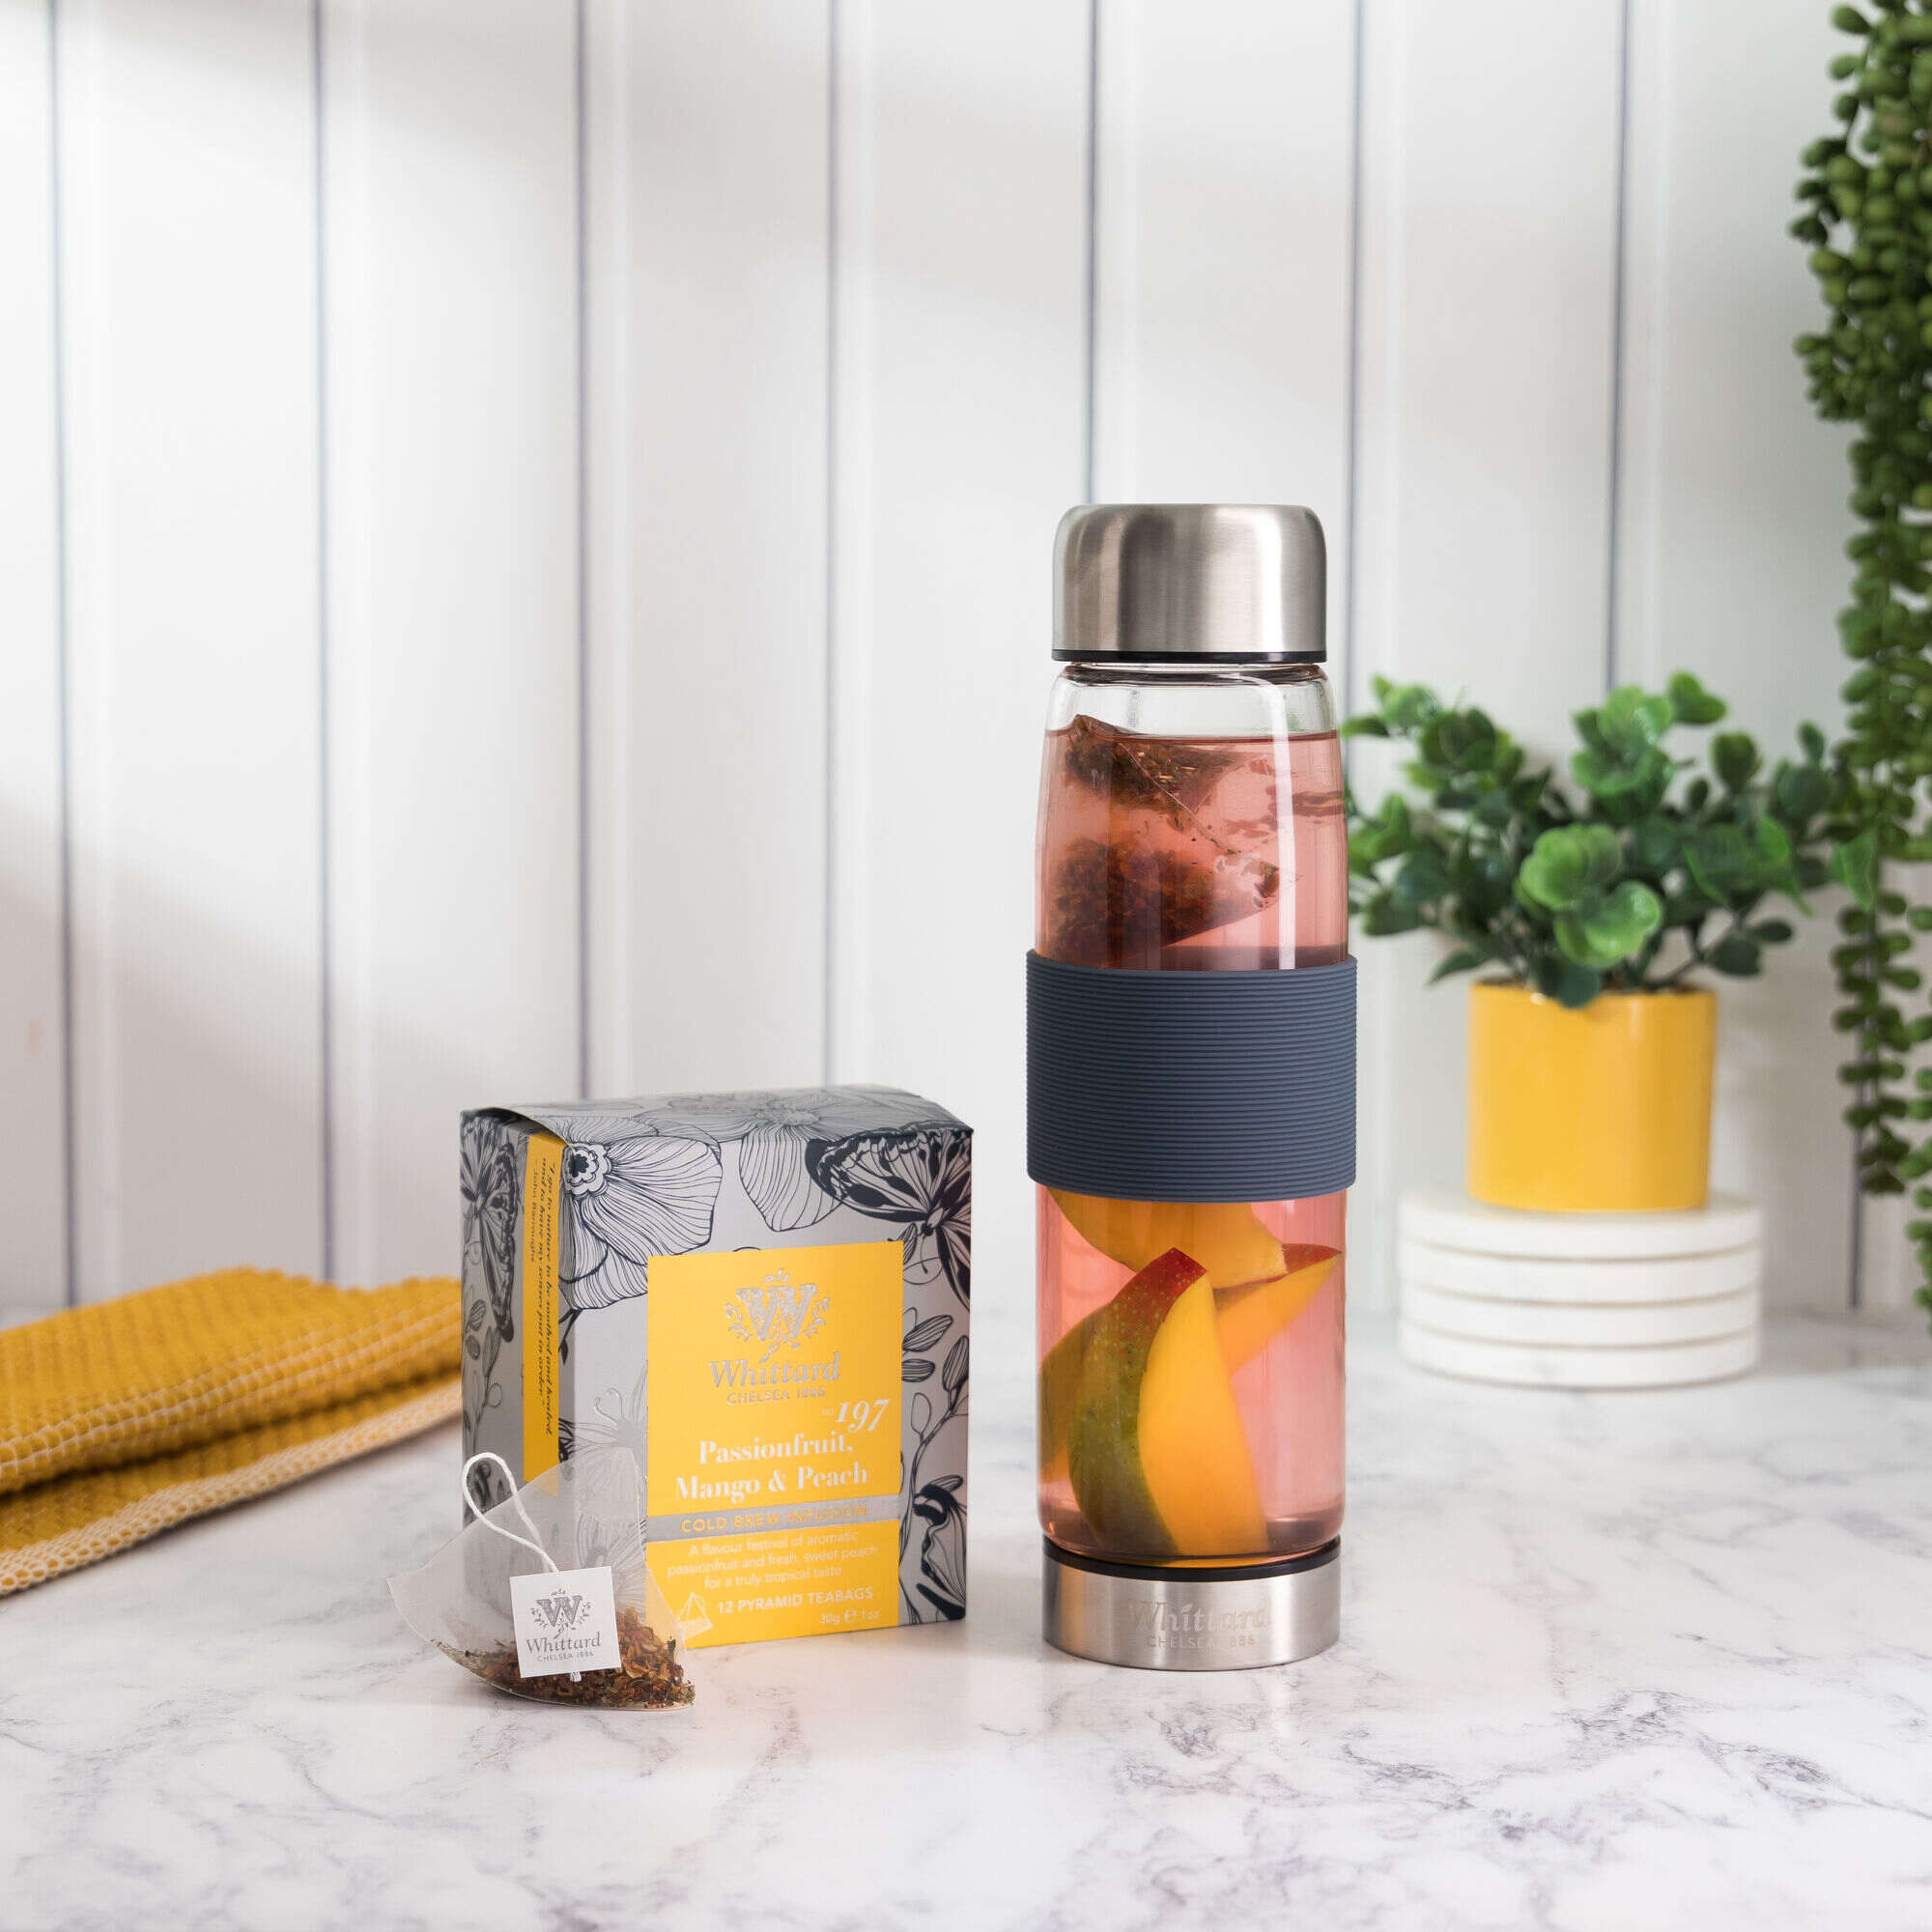 Cold Brew Passionfruit, Mango & Peach Pyramid Teabags